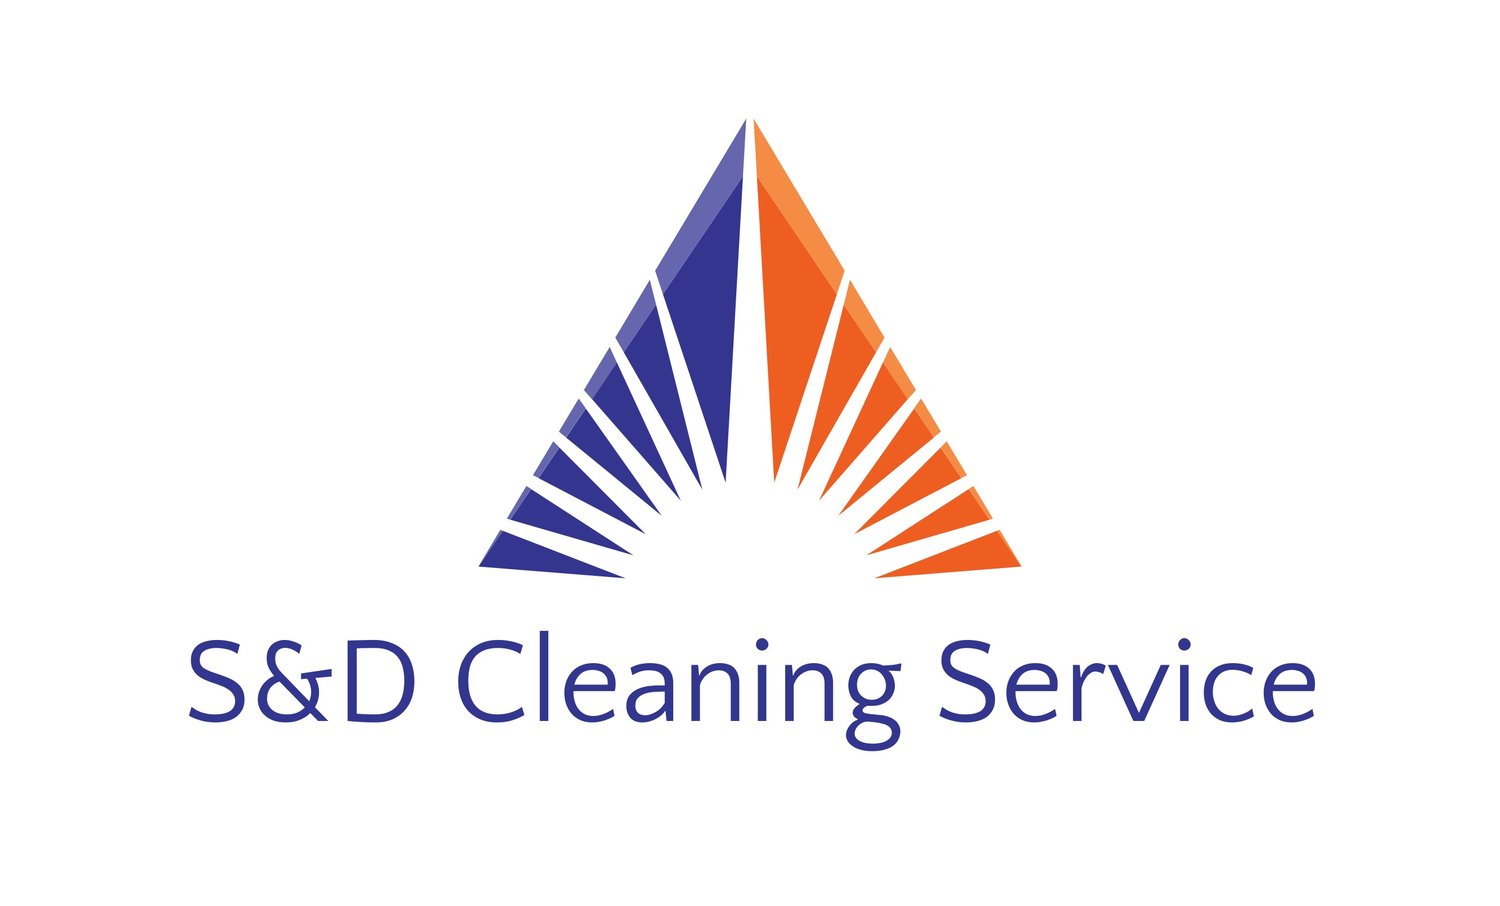 S & D Cleaning Service